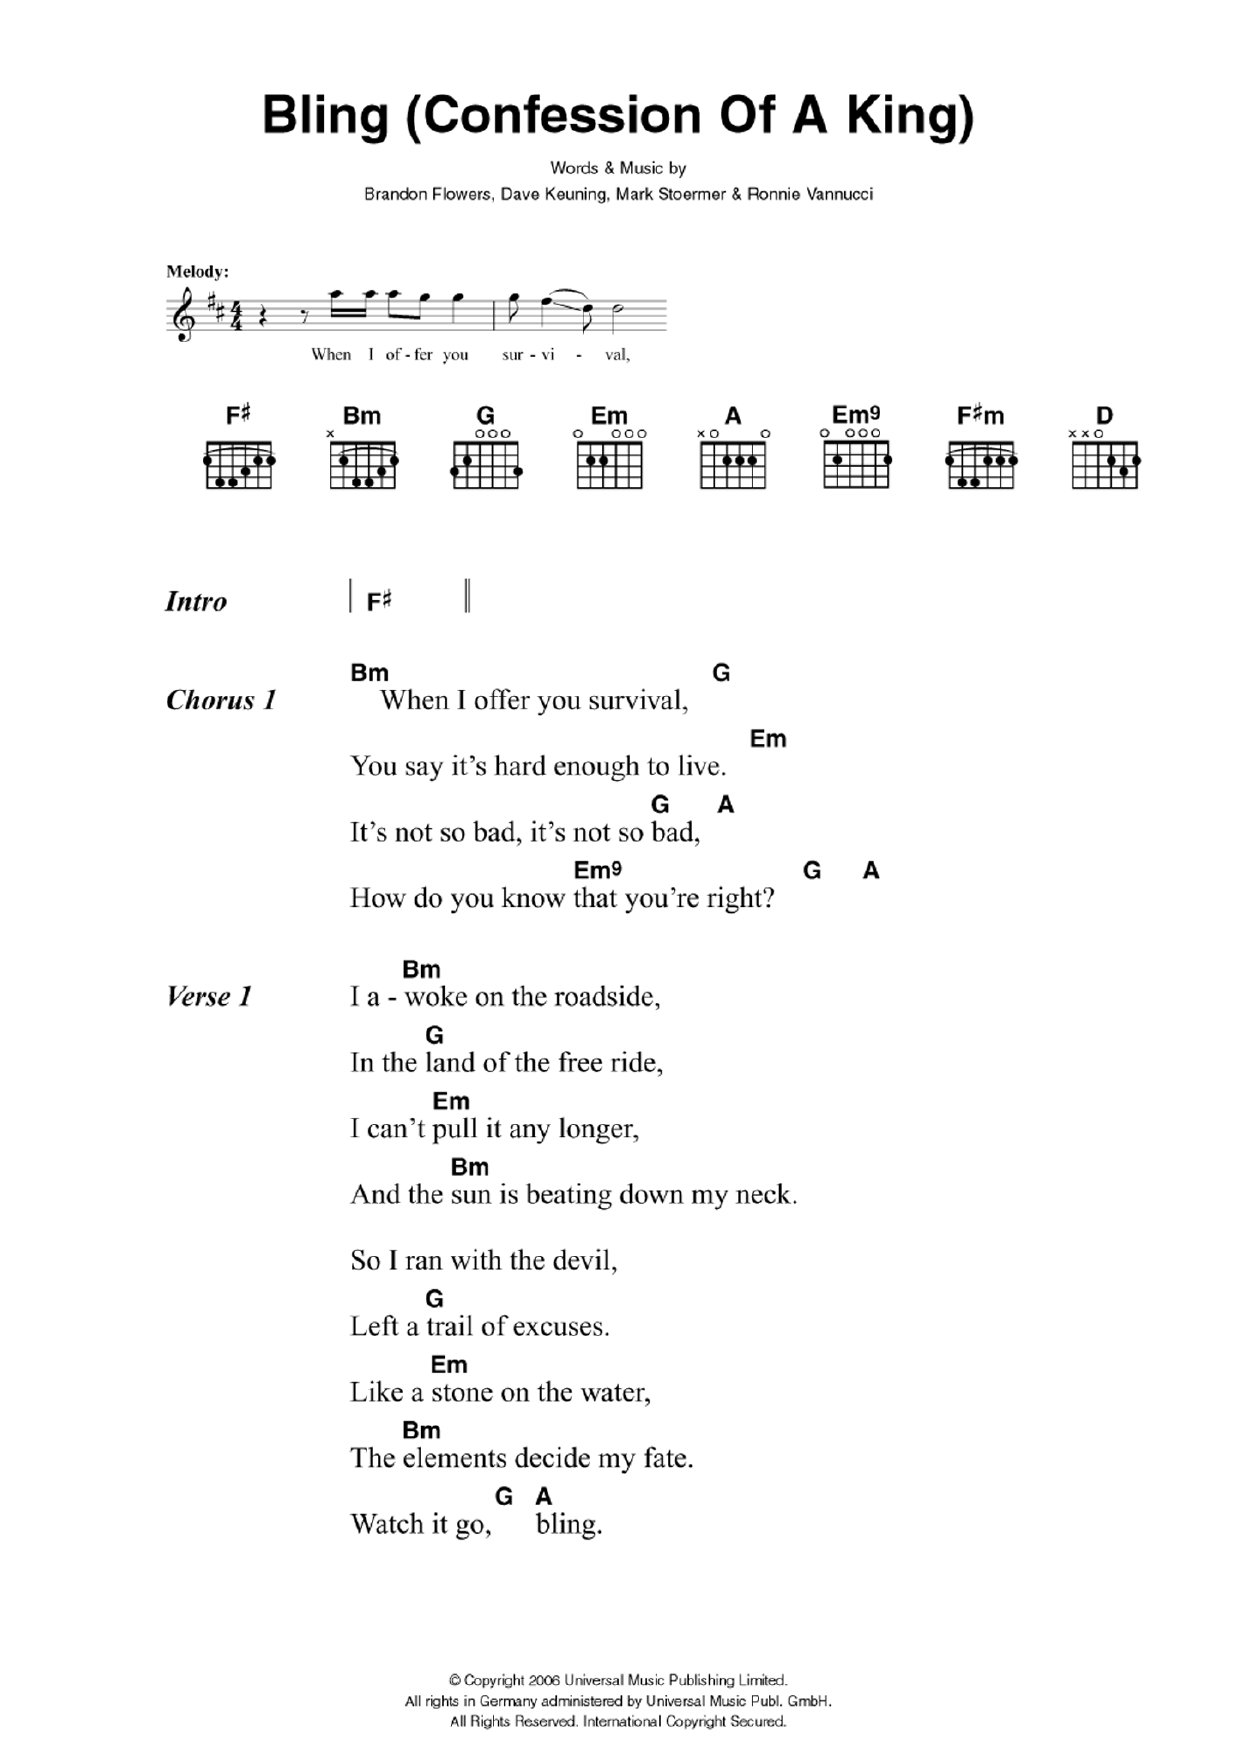 Download The Killers Bling (Confession Of A King) Sheet Music